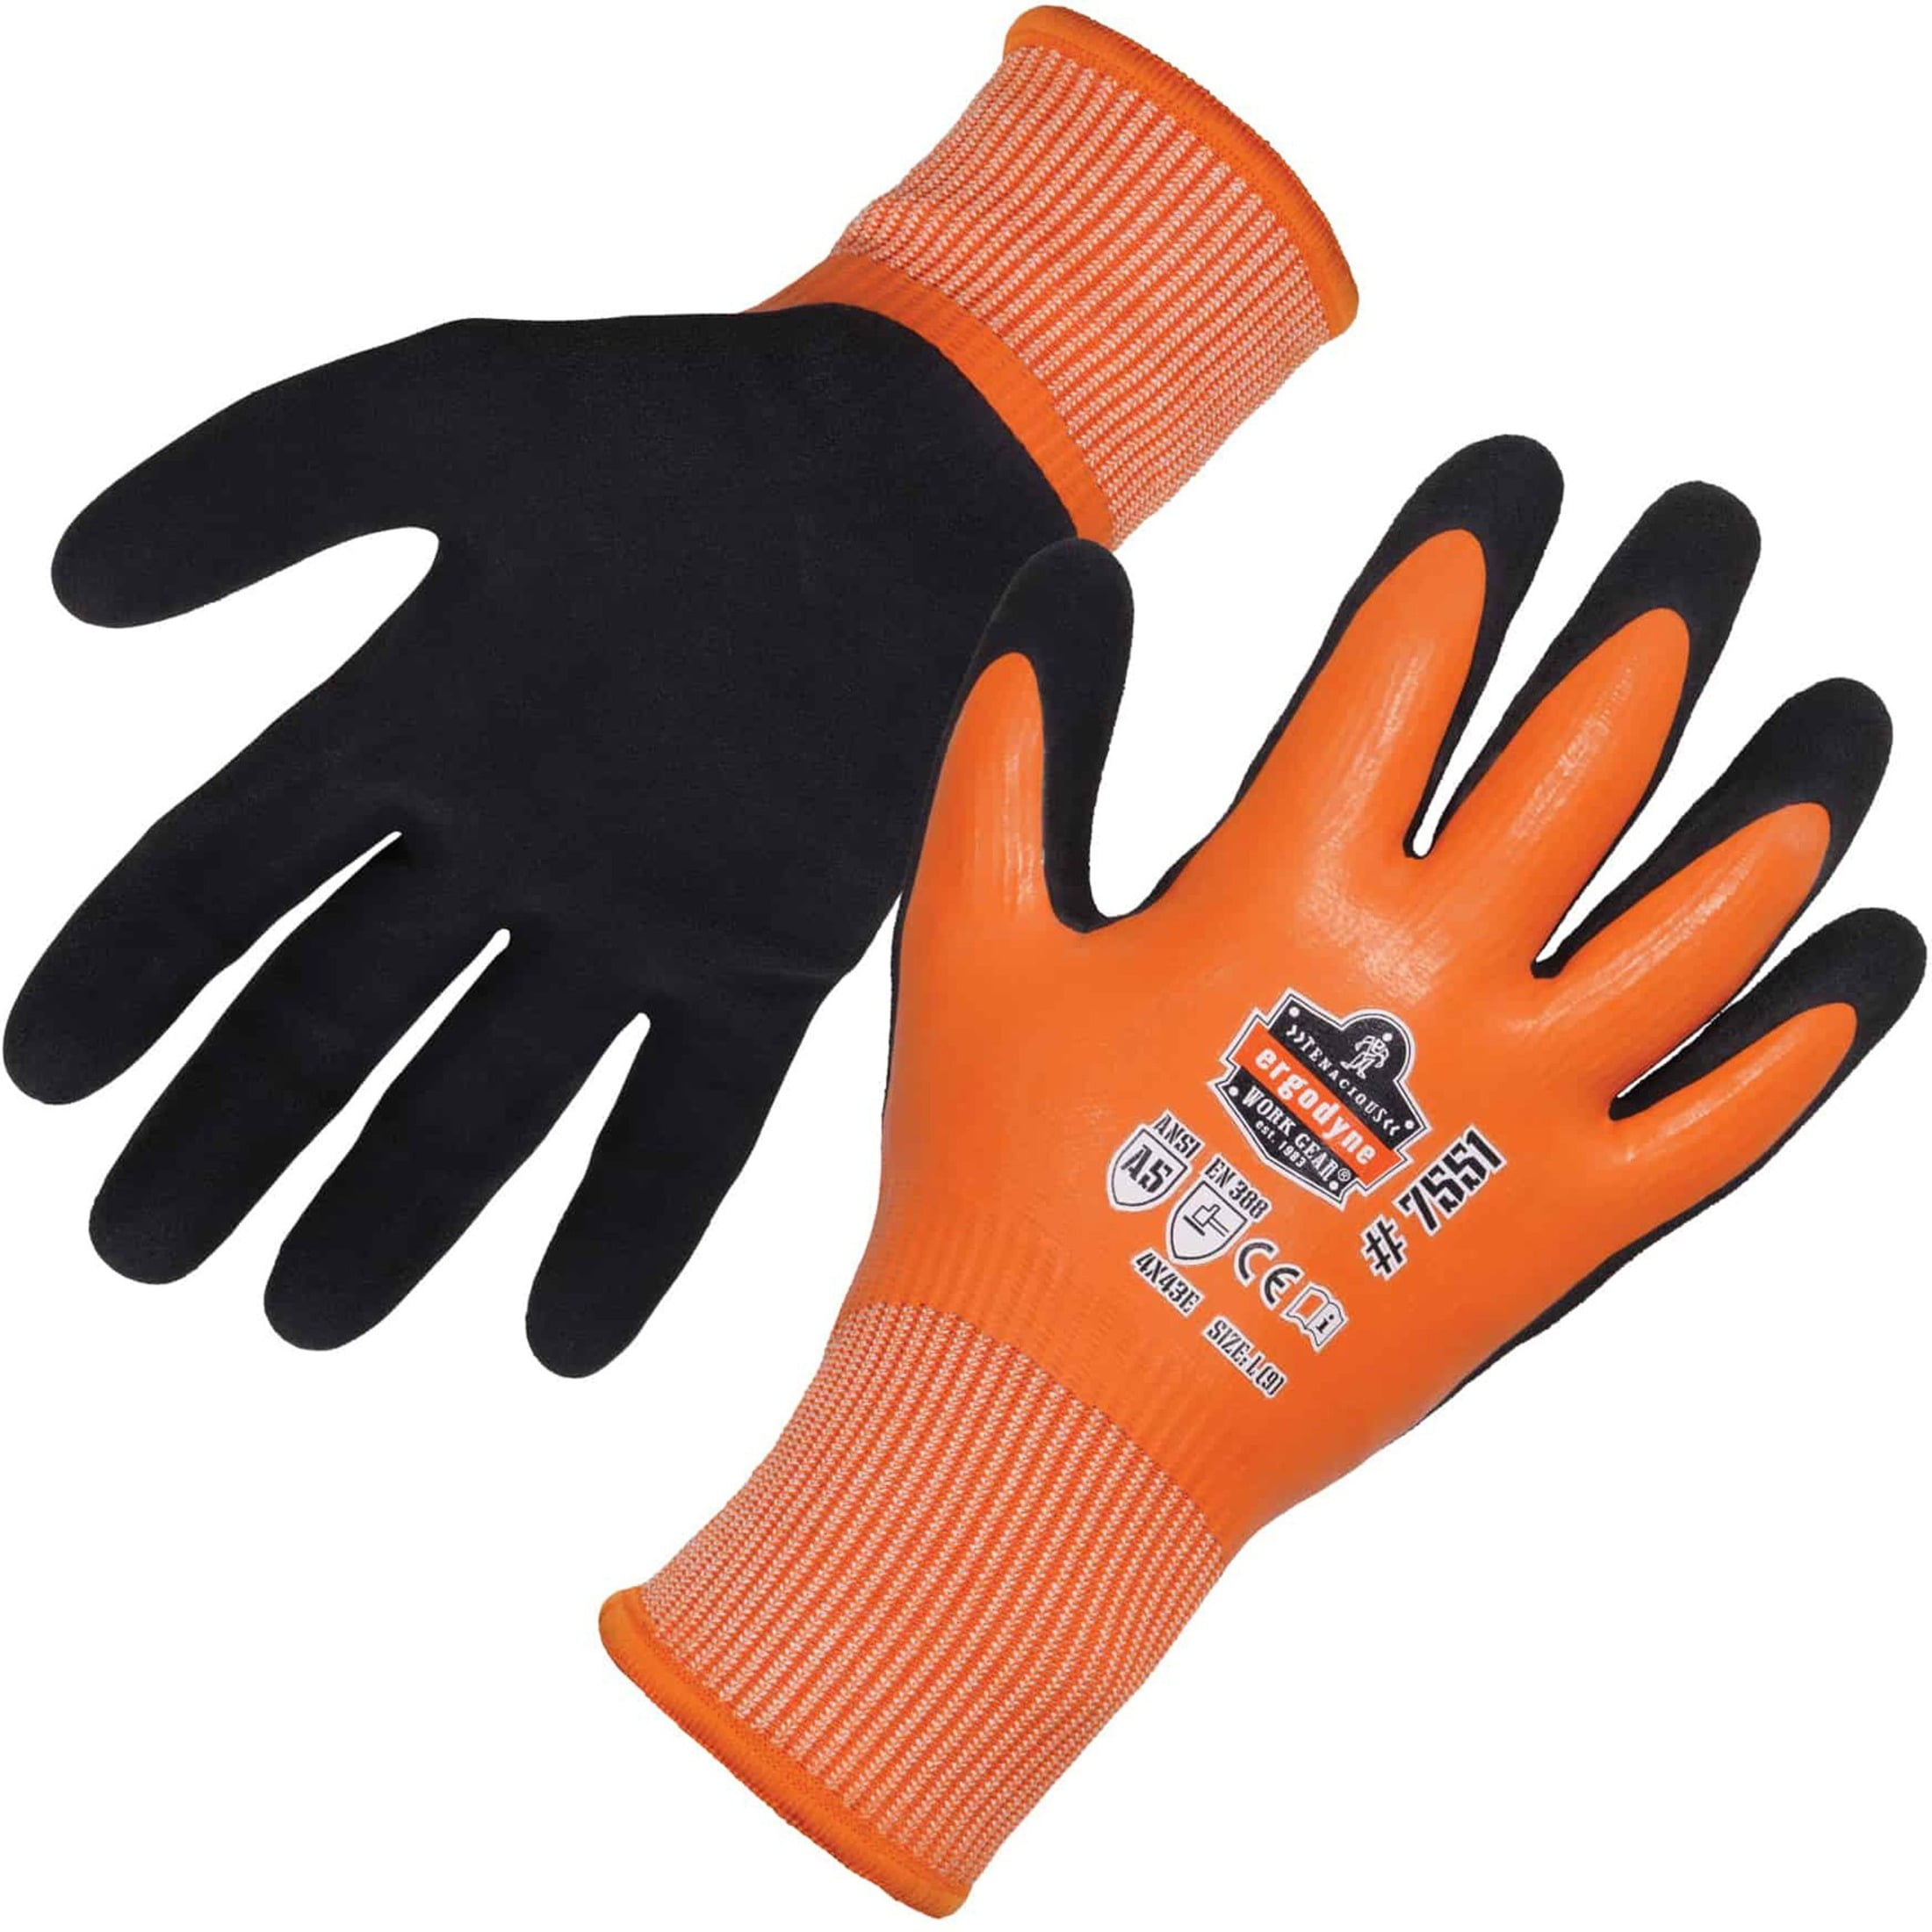 Waterproof Insulated Thermal Work Gloves Full Hand Latex Coated KG140W 